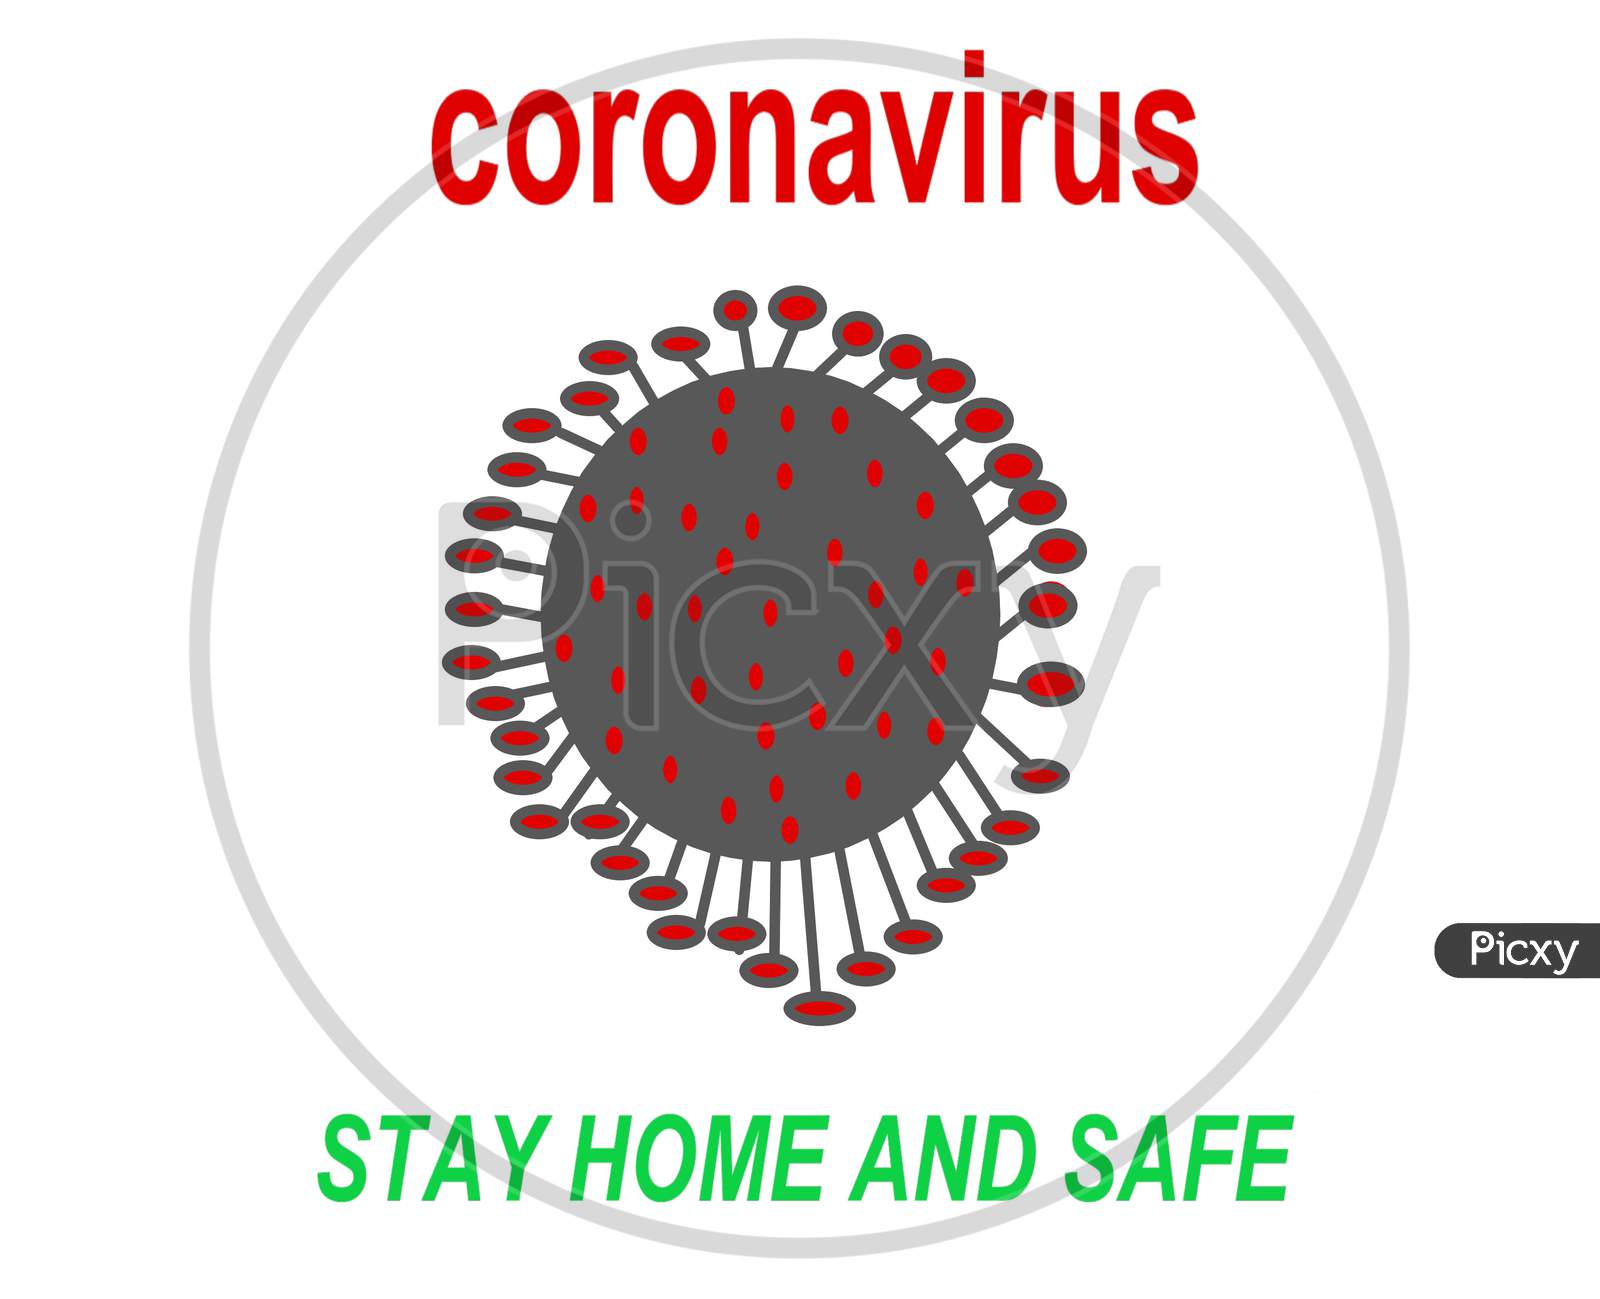 Coronavirus Sign With Message Stay Home And Safe.